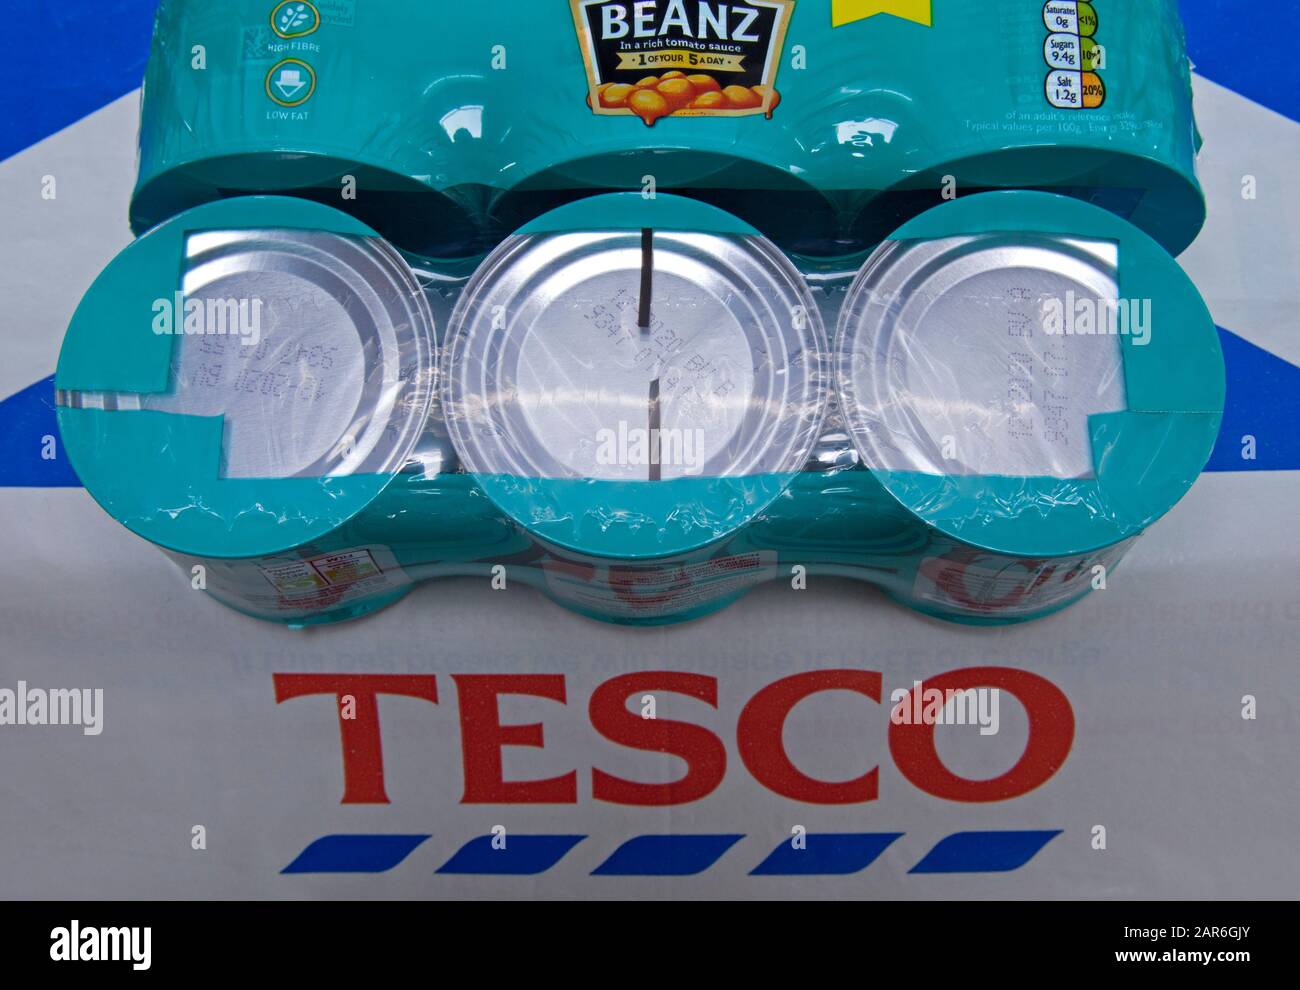 Tesco UK from March 2020 will abandon sale of plastic-wrapped multipack tins to slash packaging and will offer multi-buy deals instead. Stock Photo